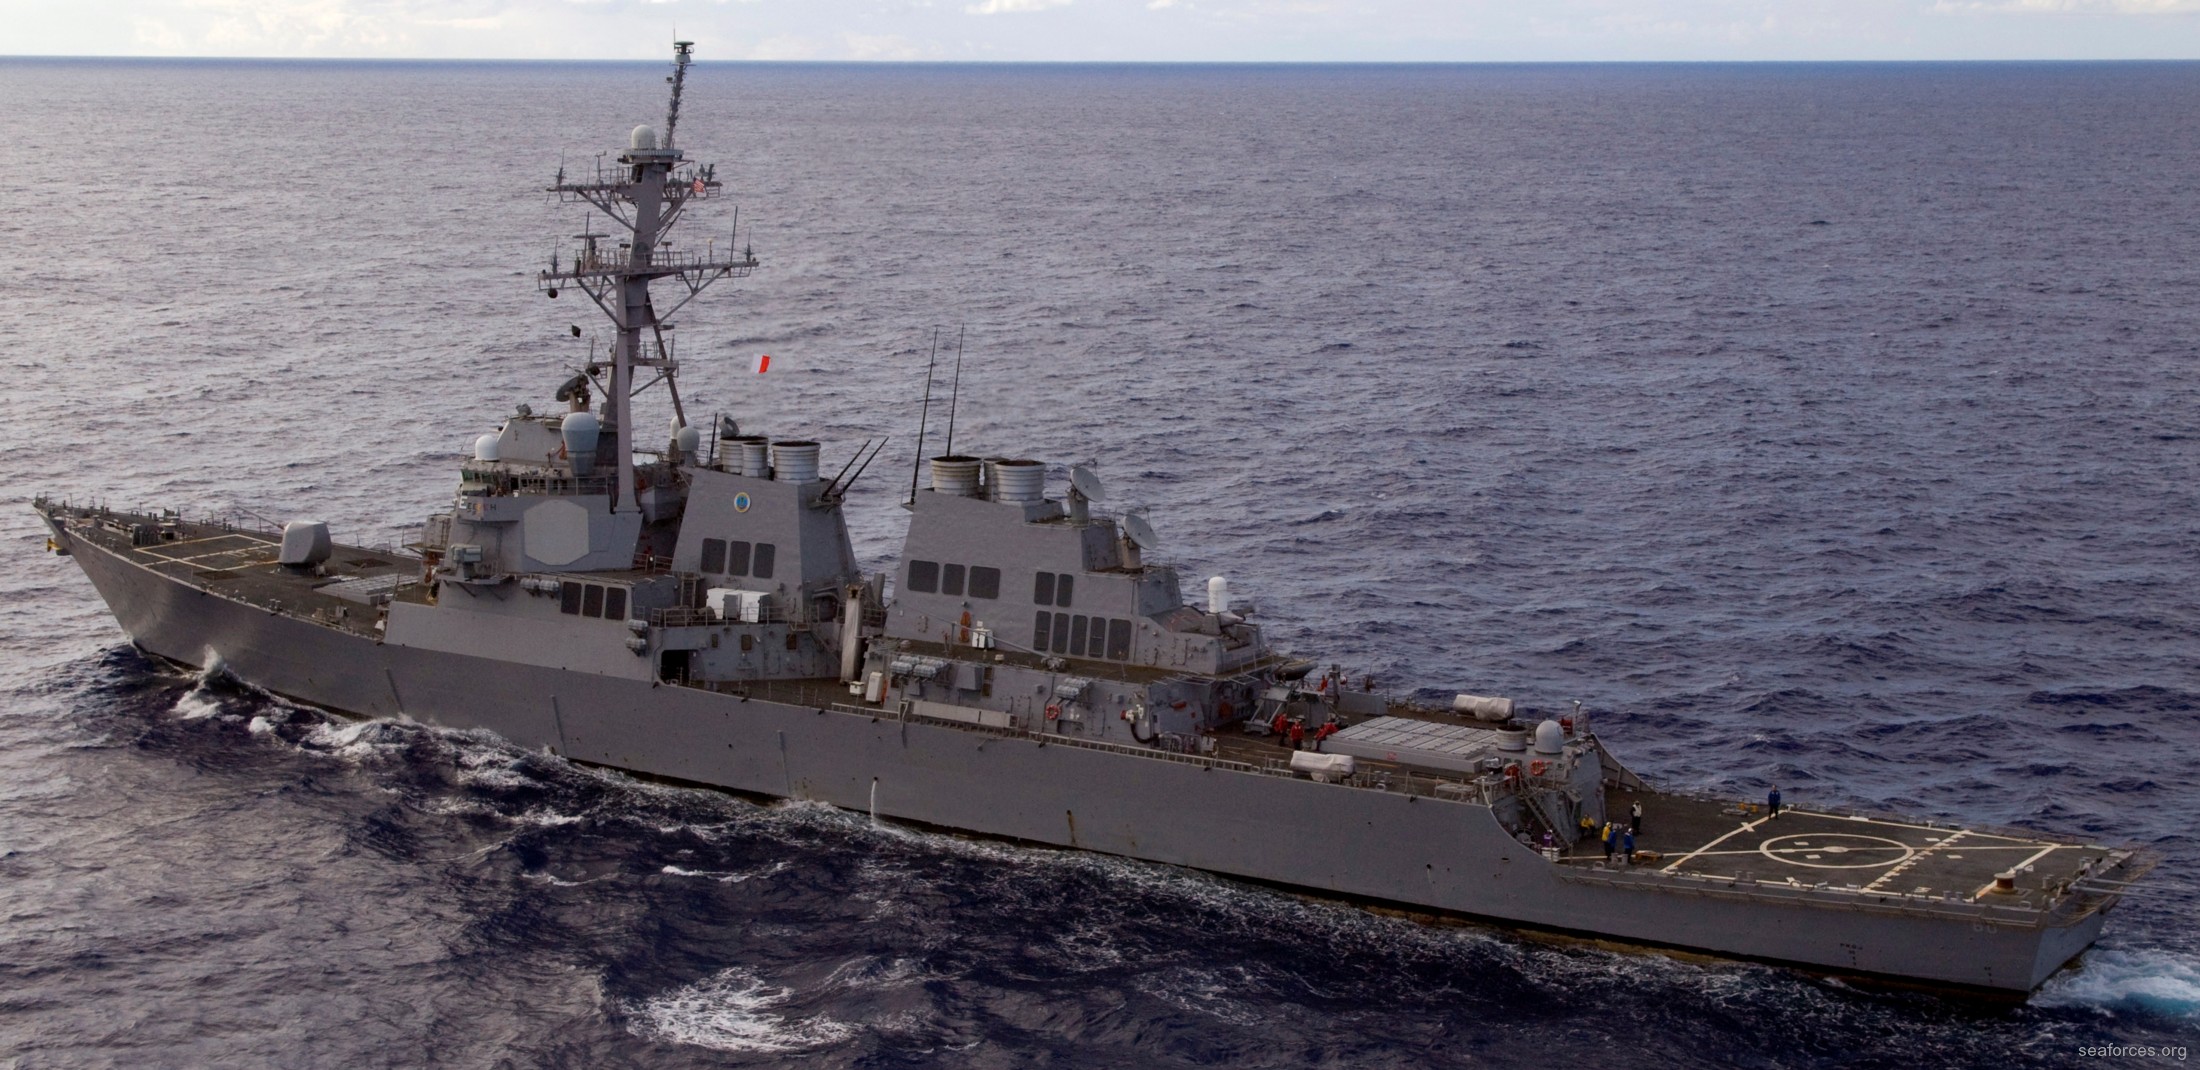 ddg-60 uss paul hamilton guided missile destroyer us navy 28